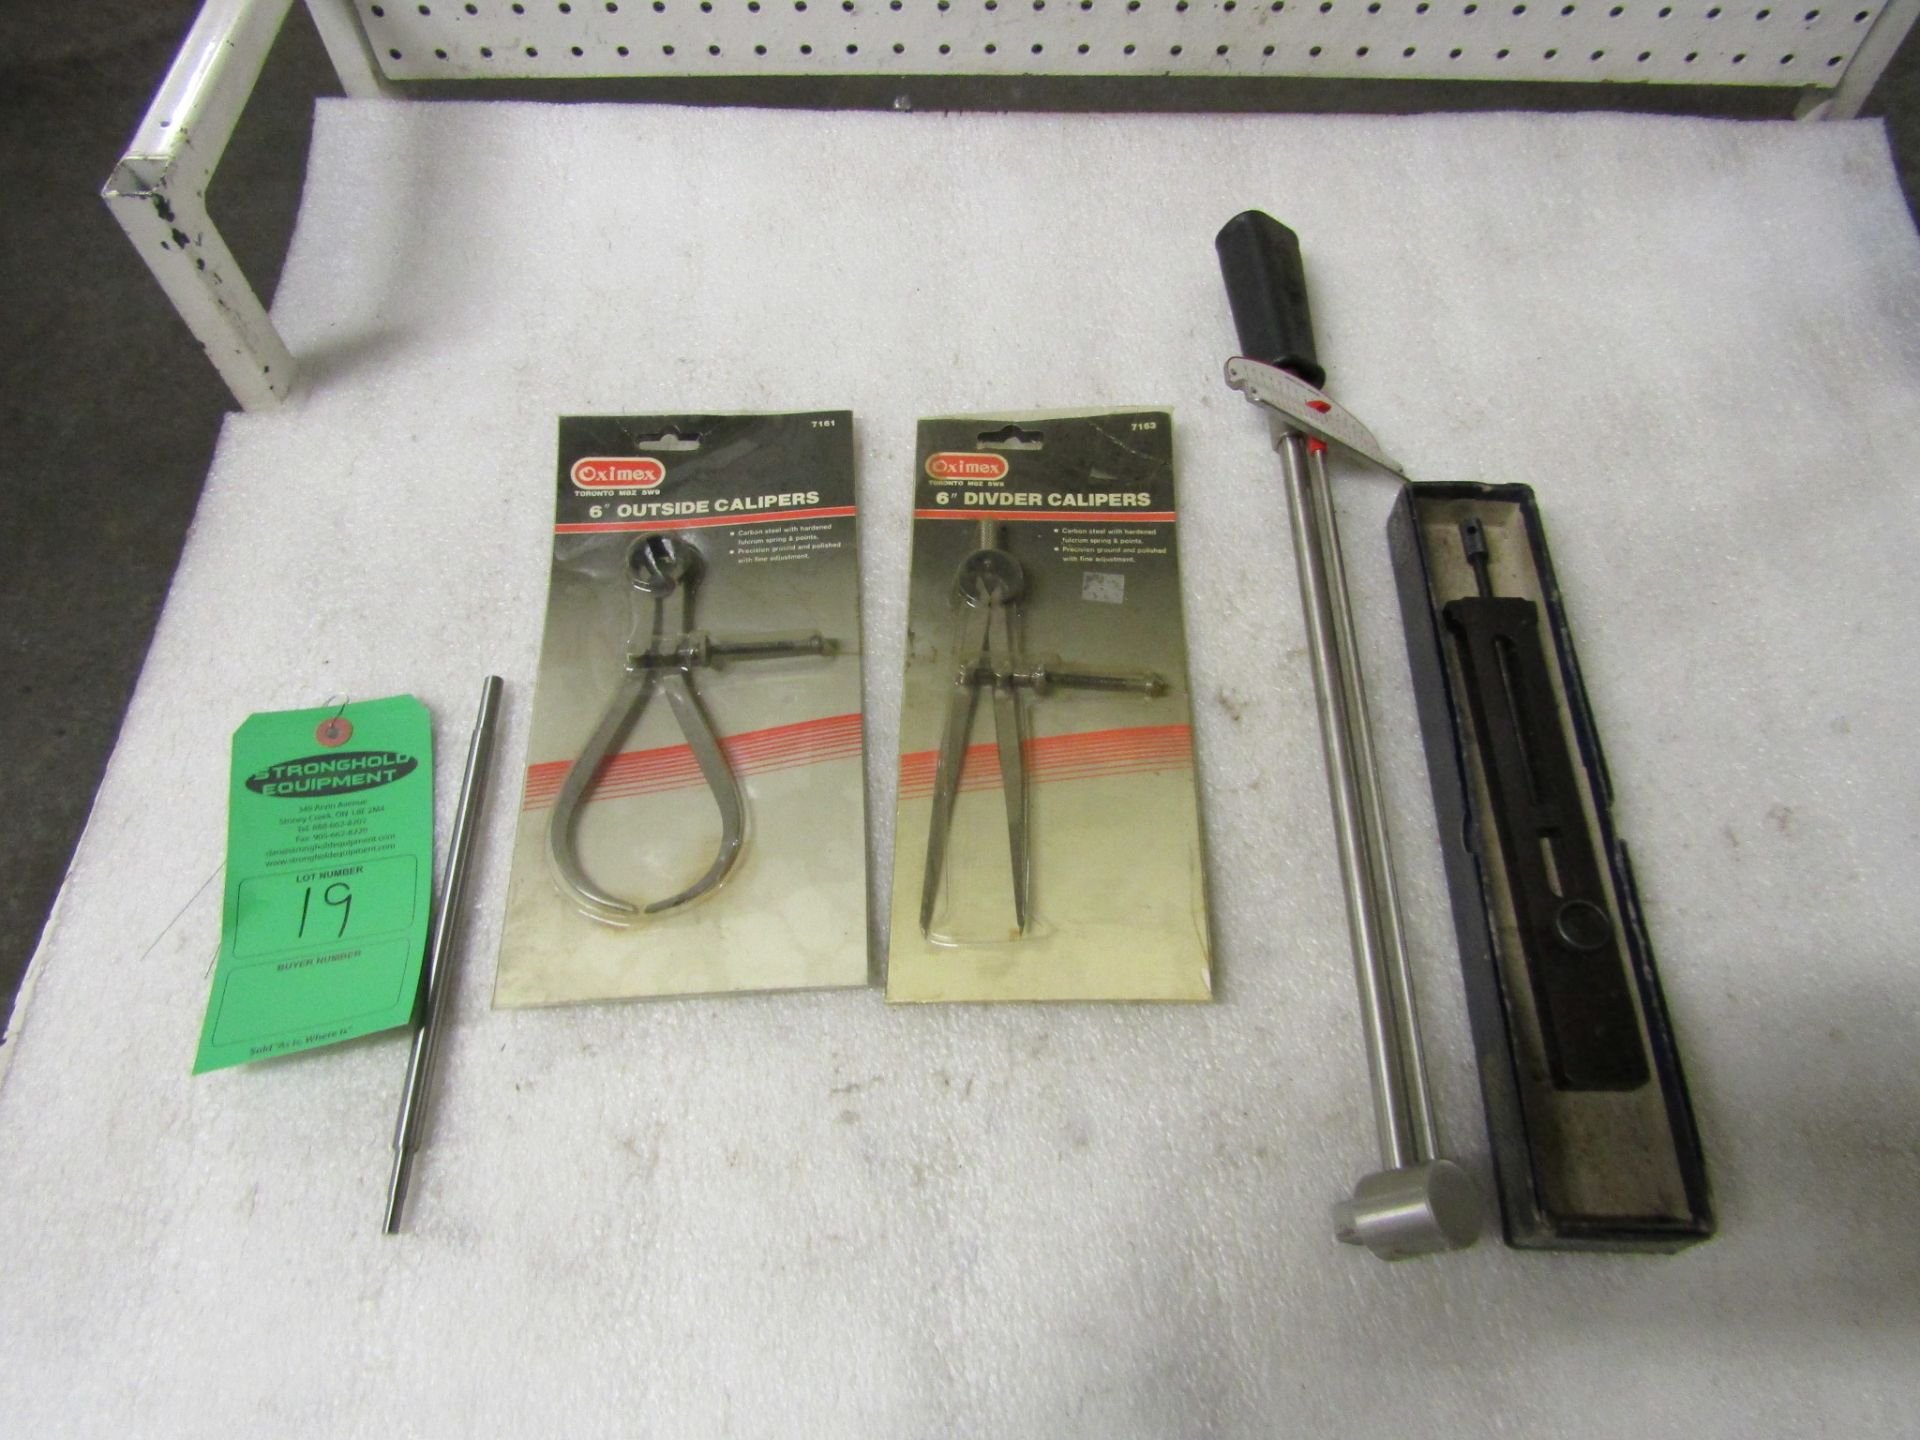 Lot with 2 X calipers & precision torque wrench